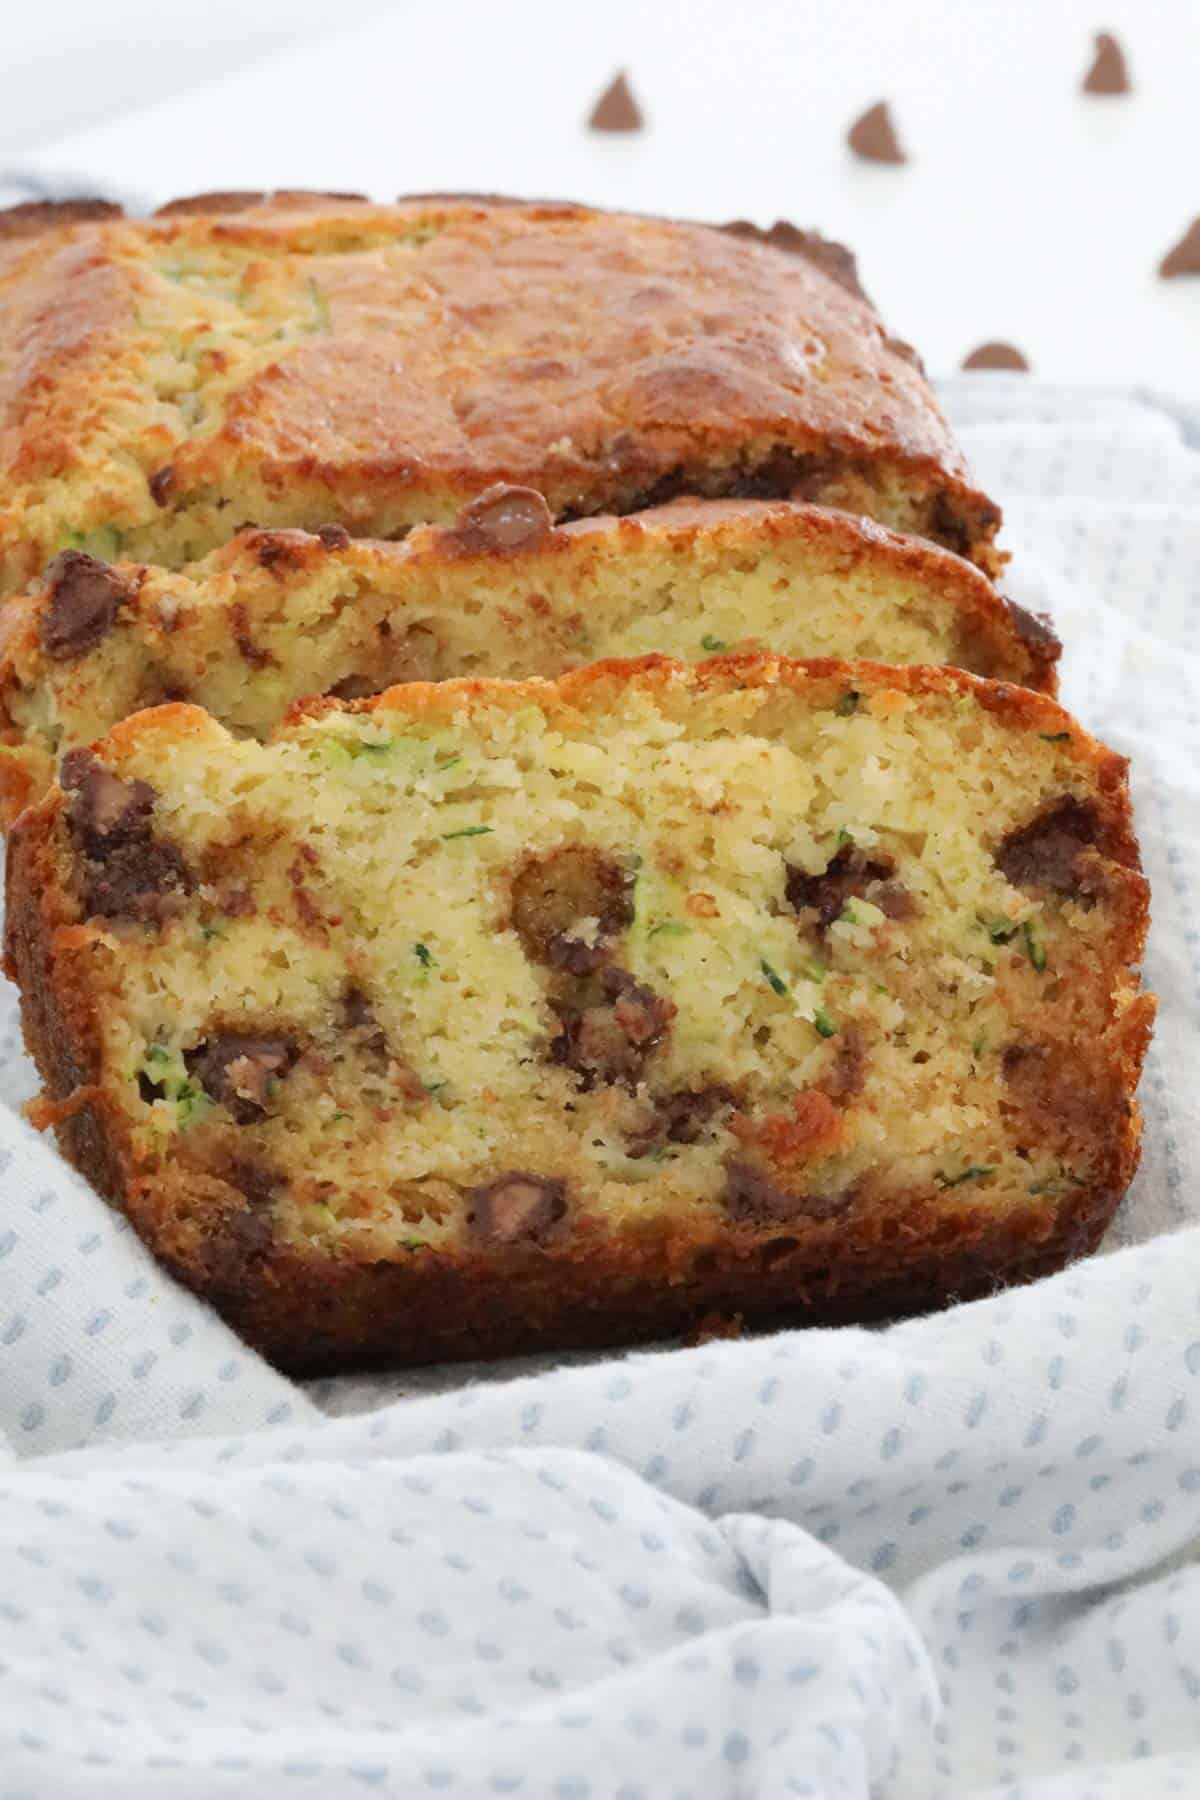 Slices of zucchini bread with chocolate chips on a tea towel.